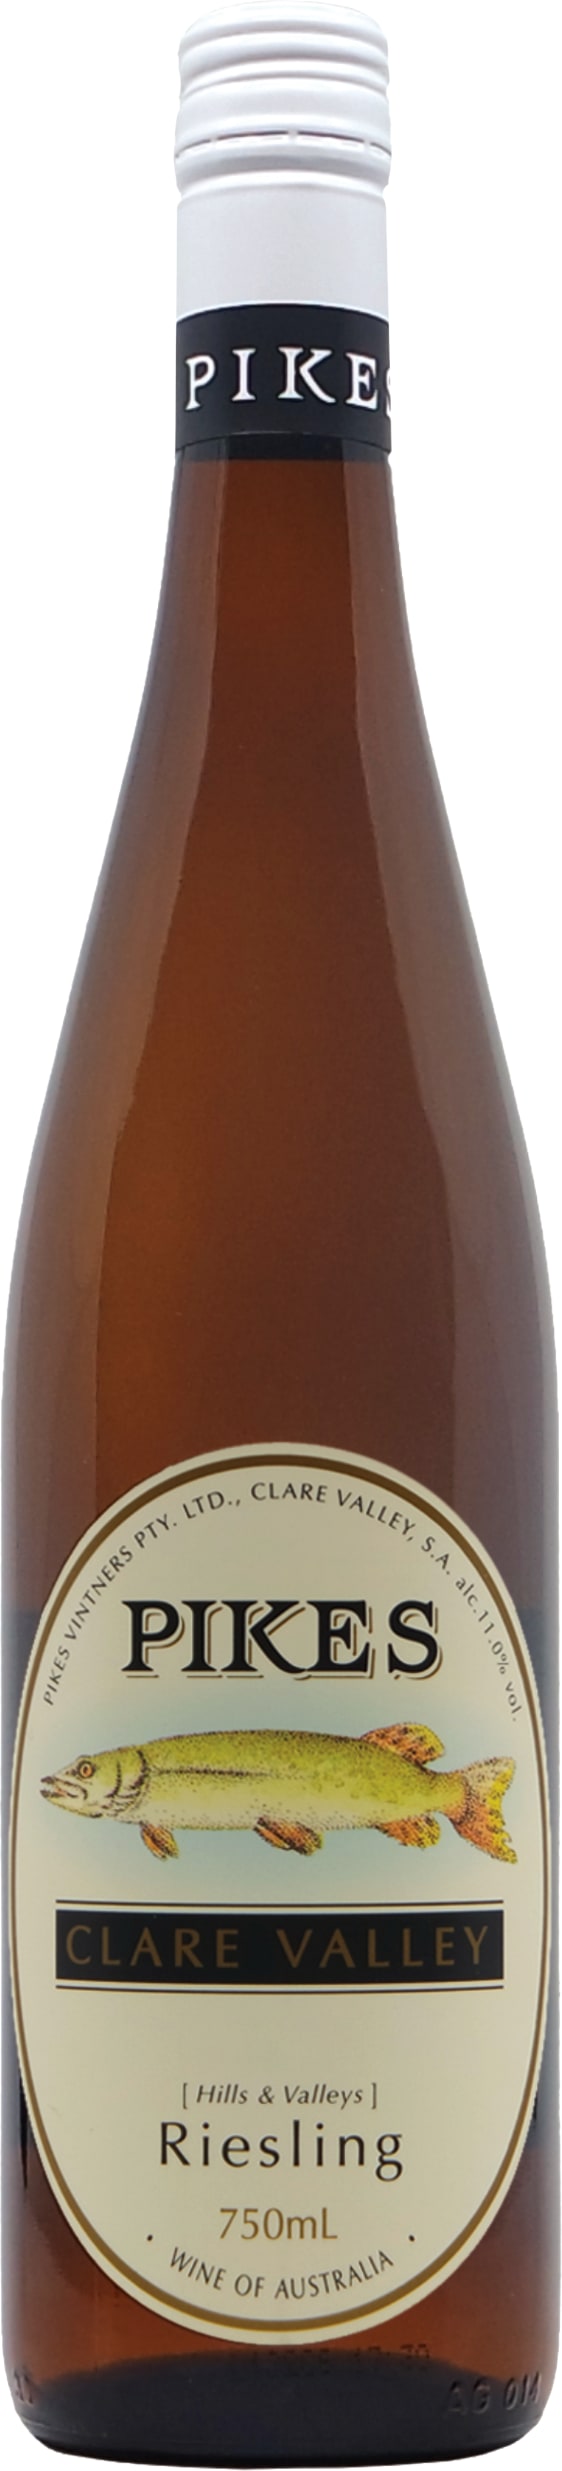 Pikes Hills and Valleys Riesling 2022 75cl - Buy Pikes Wines from GREAT WINES DIRECT wine shop